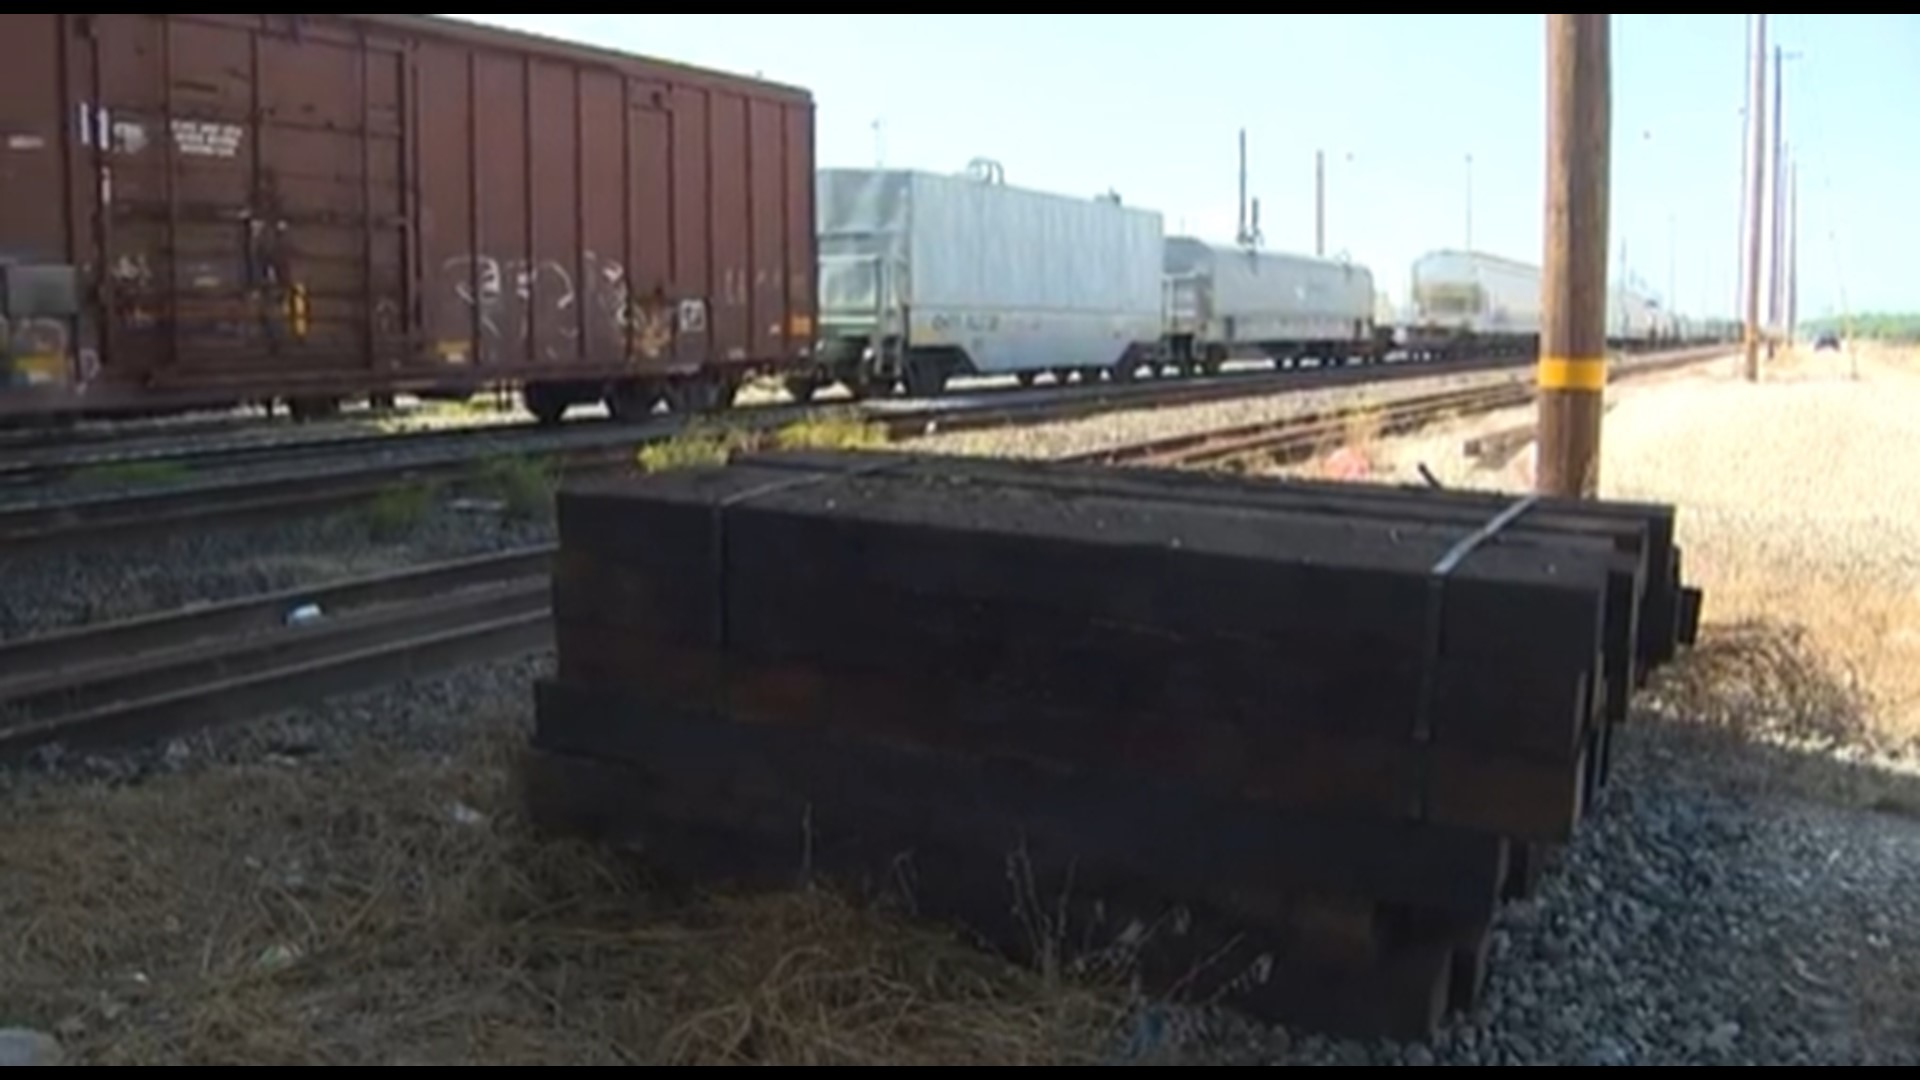 Surface soil samples collected in July around the contaminated Union Pacific rail yard contain dioxin, a highly toxic chemical compound associated with cancer.